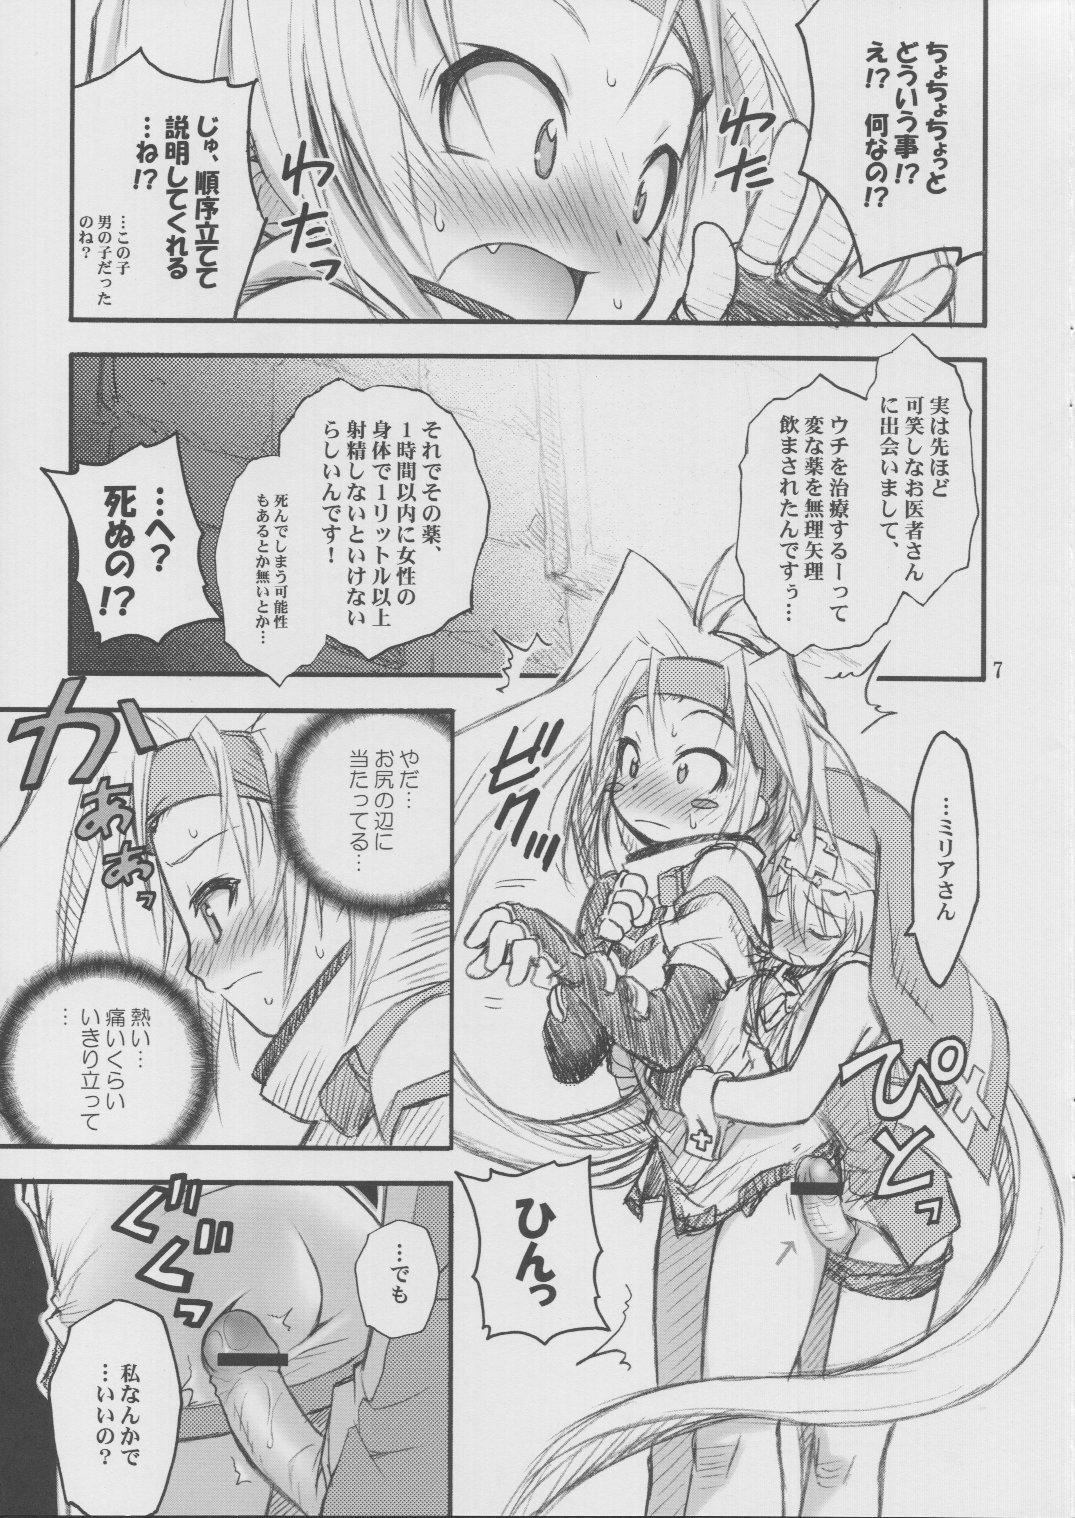 Punjabi Anone. - Guilty gear Brother Sister - Page 6